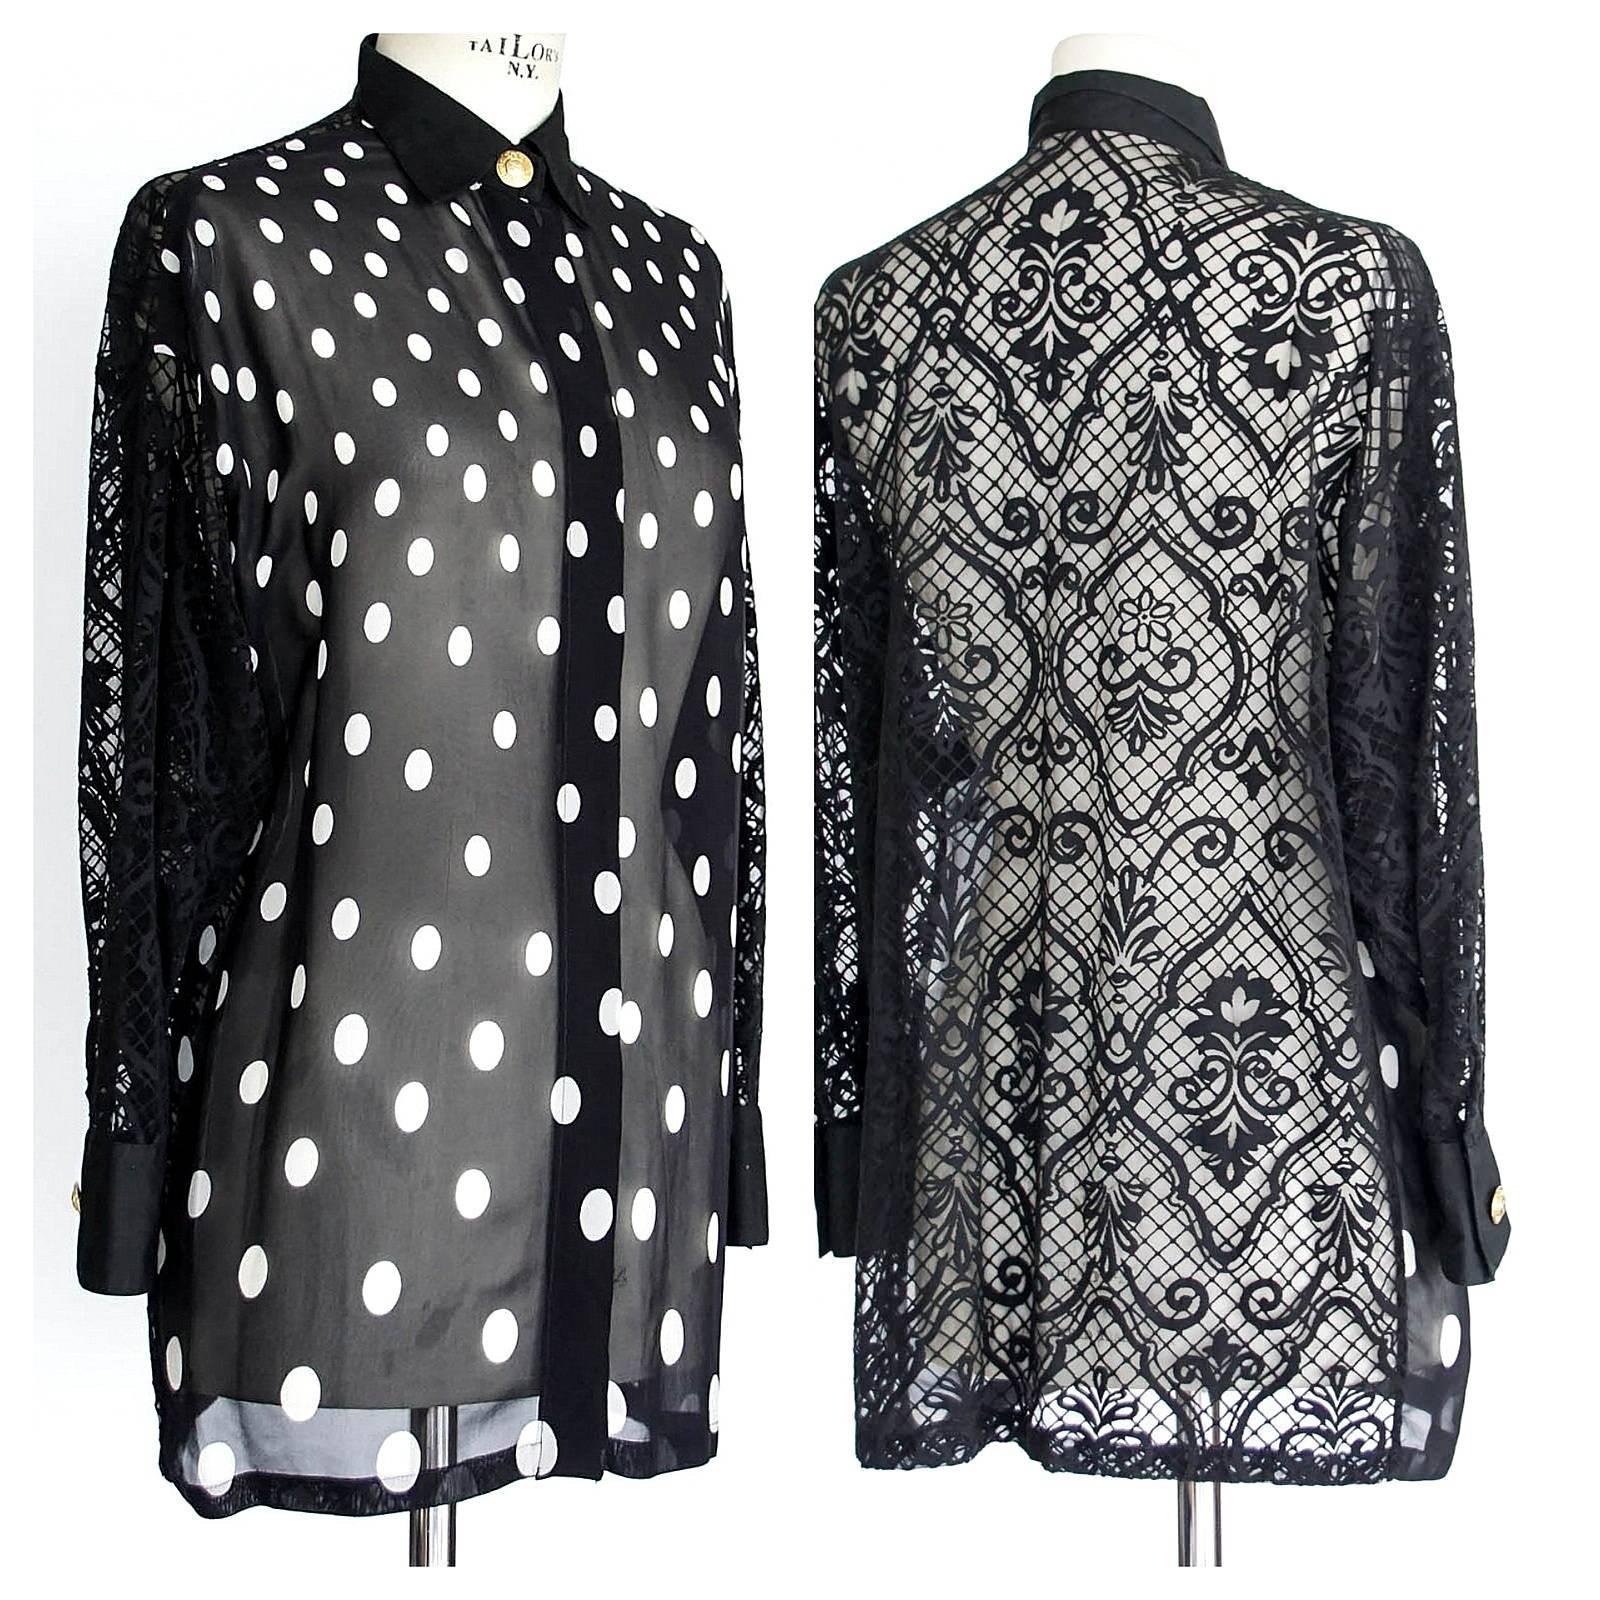 Guaranteed authentic GIANNI VERSACE COUTURE polka dot drop shoulder tunic style blouse.
Black and white polka dot blouse with lace rear and sleeves.
Hidden front placket with gold Medusa Head top button.
1 gold Medusa Head button on each cuff.
No